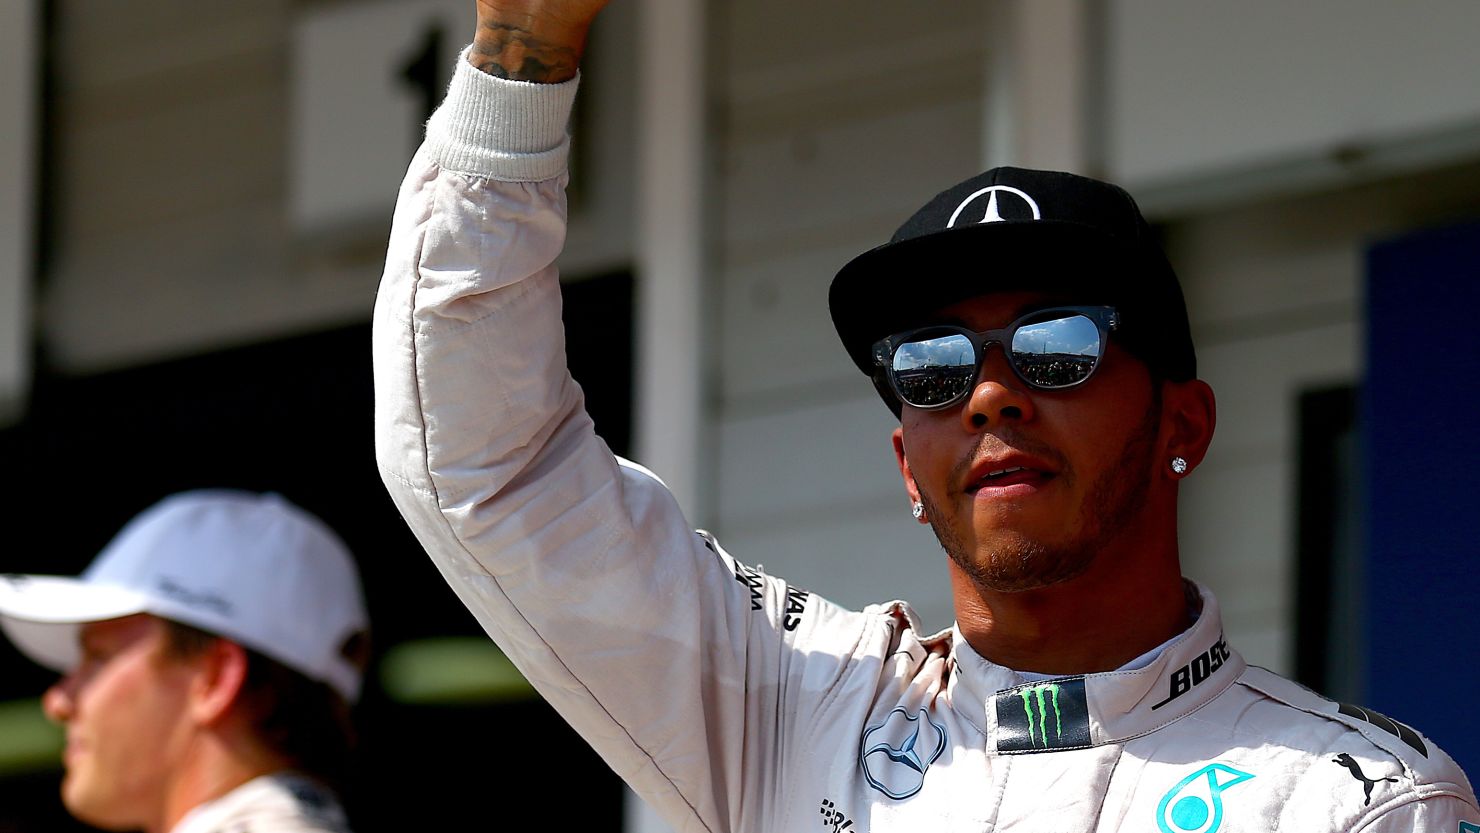 Lewis Hamilton was celebrating the 49th pole of his career and ninth this season.